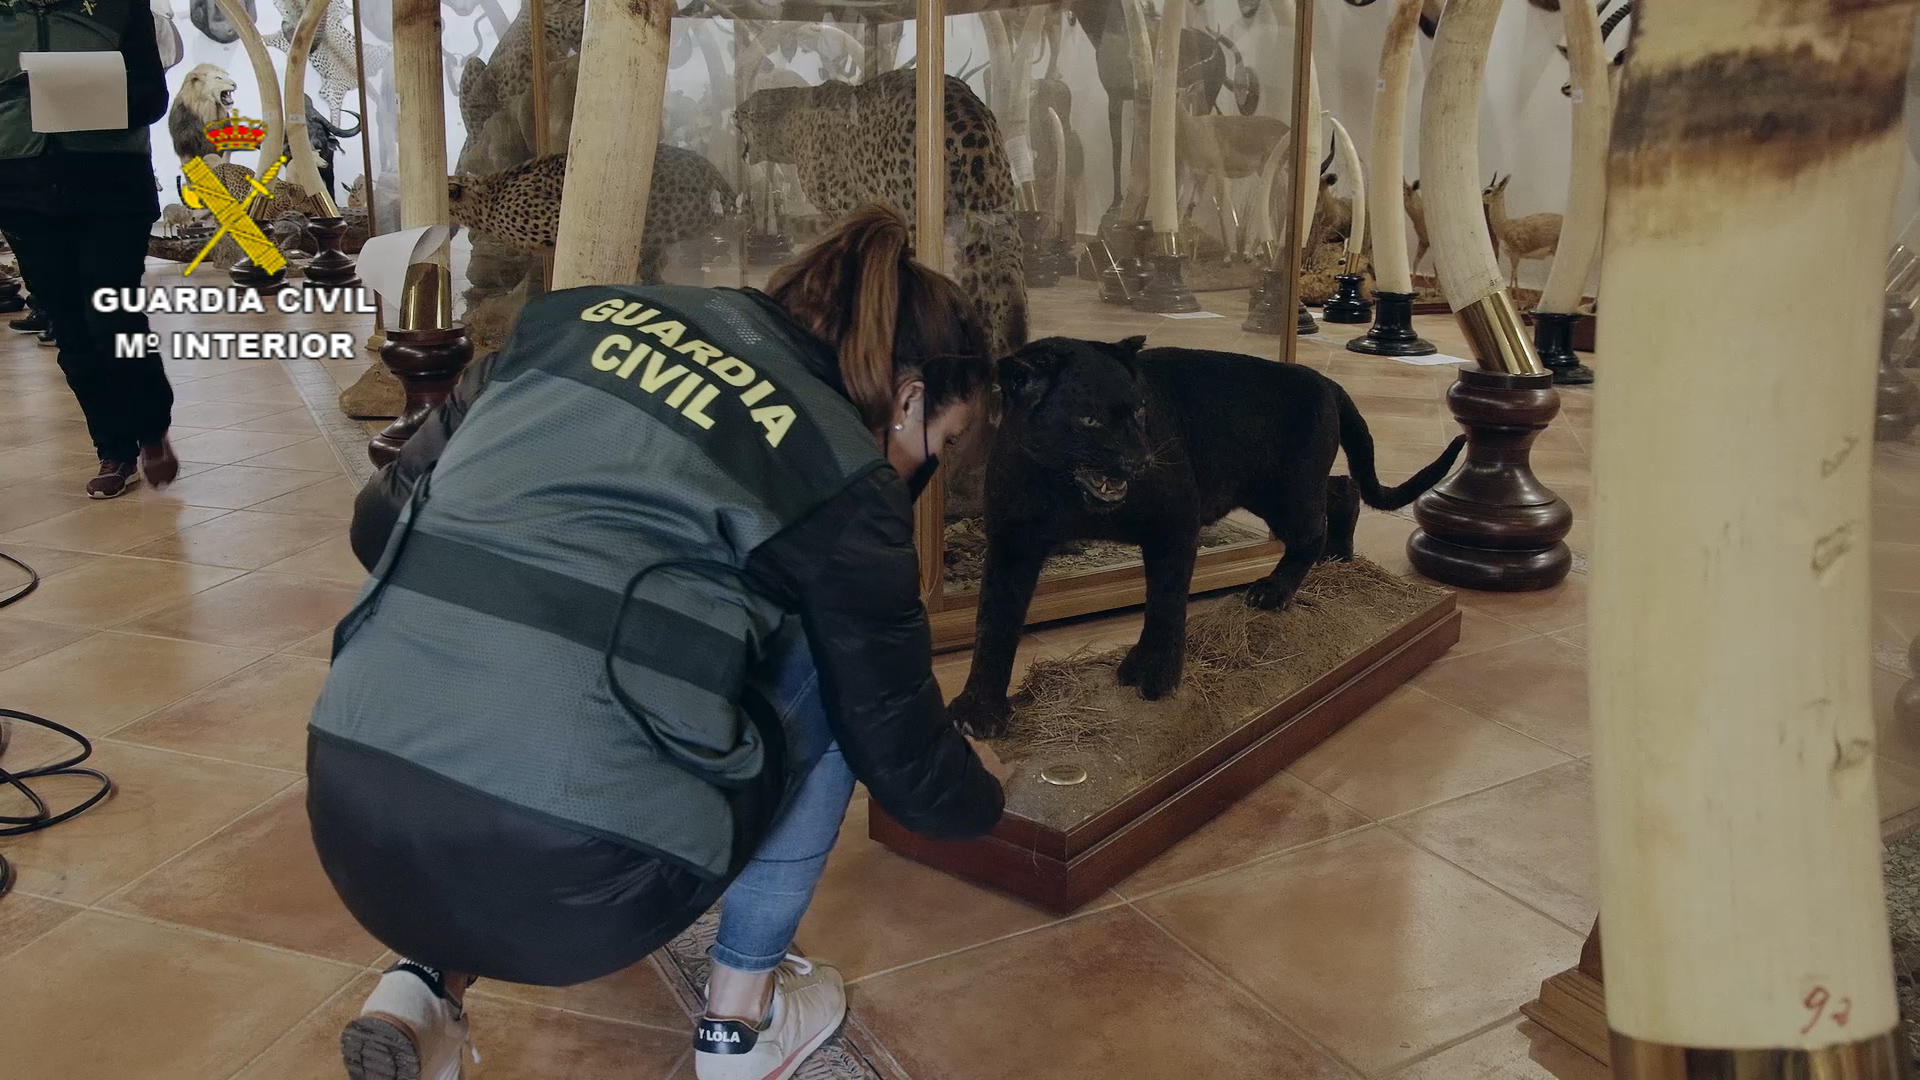 An officer examines a number of big cats, including some in glass display cases.